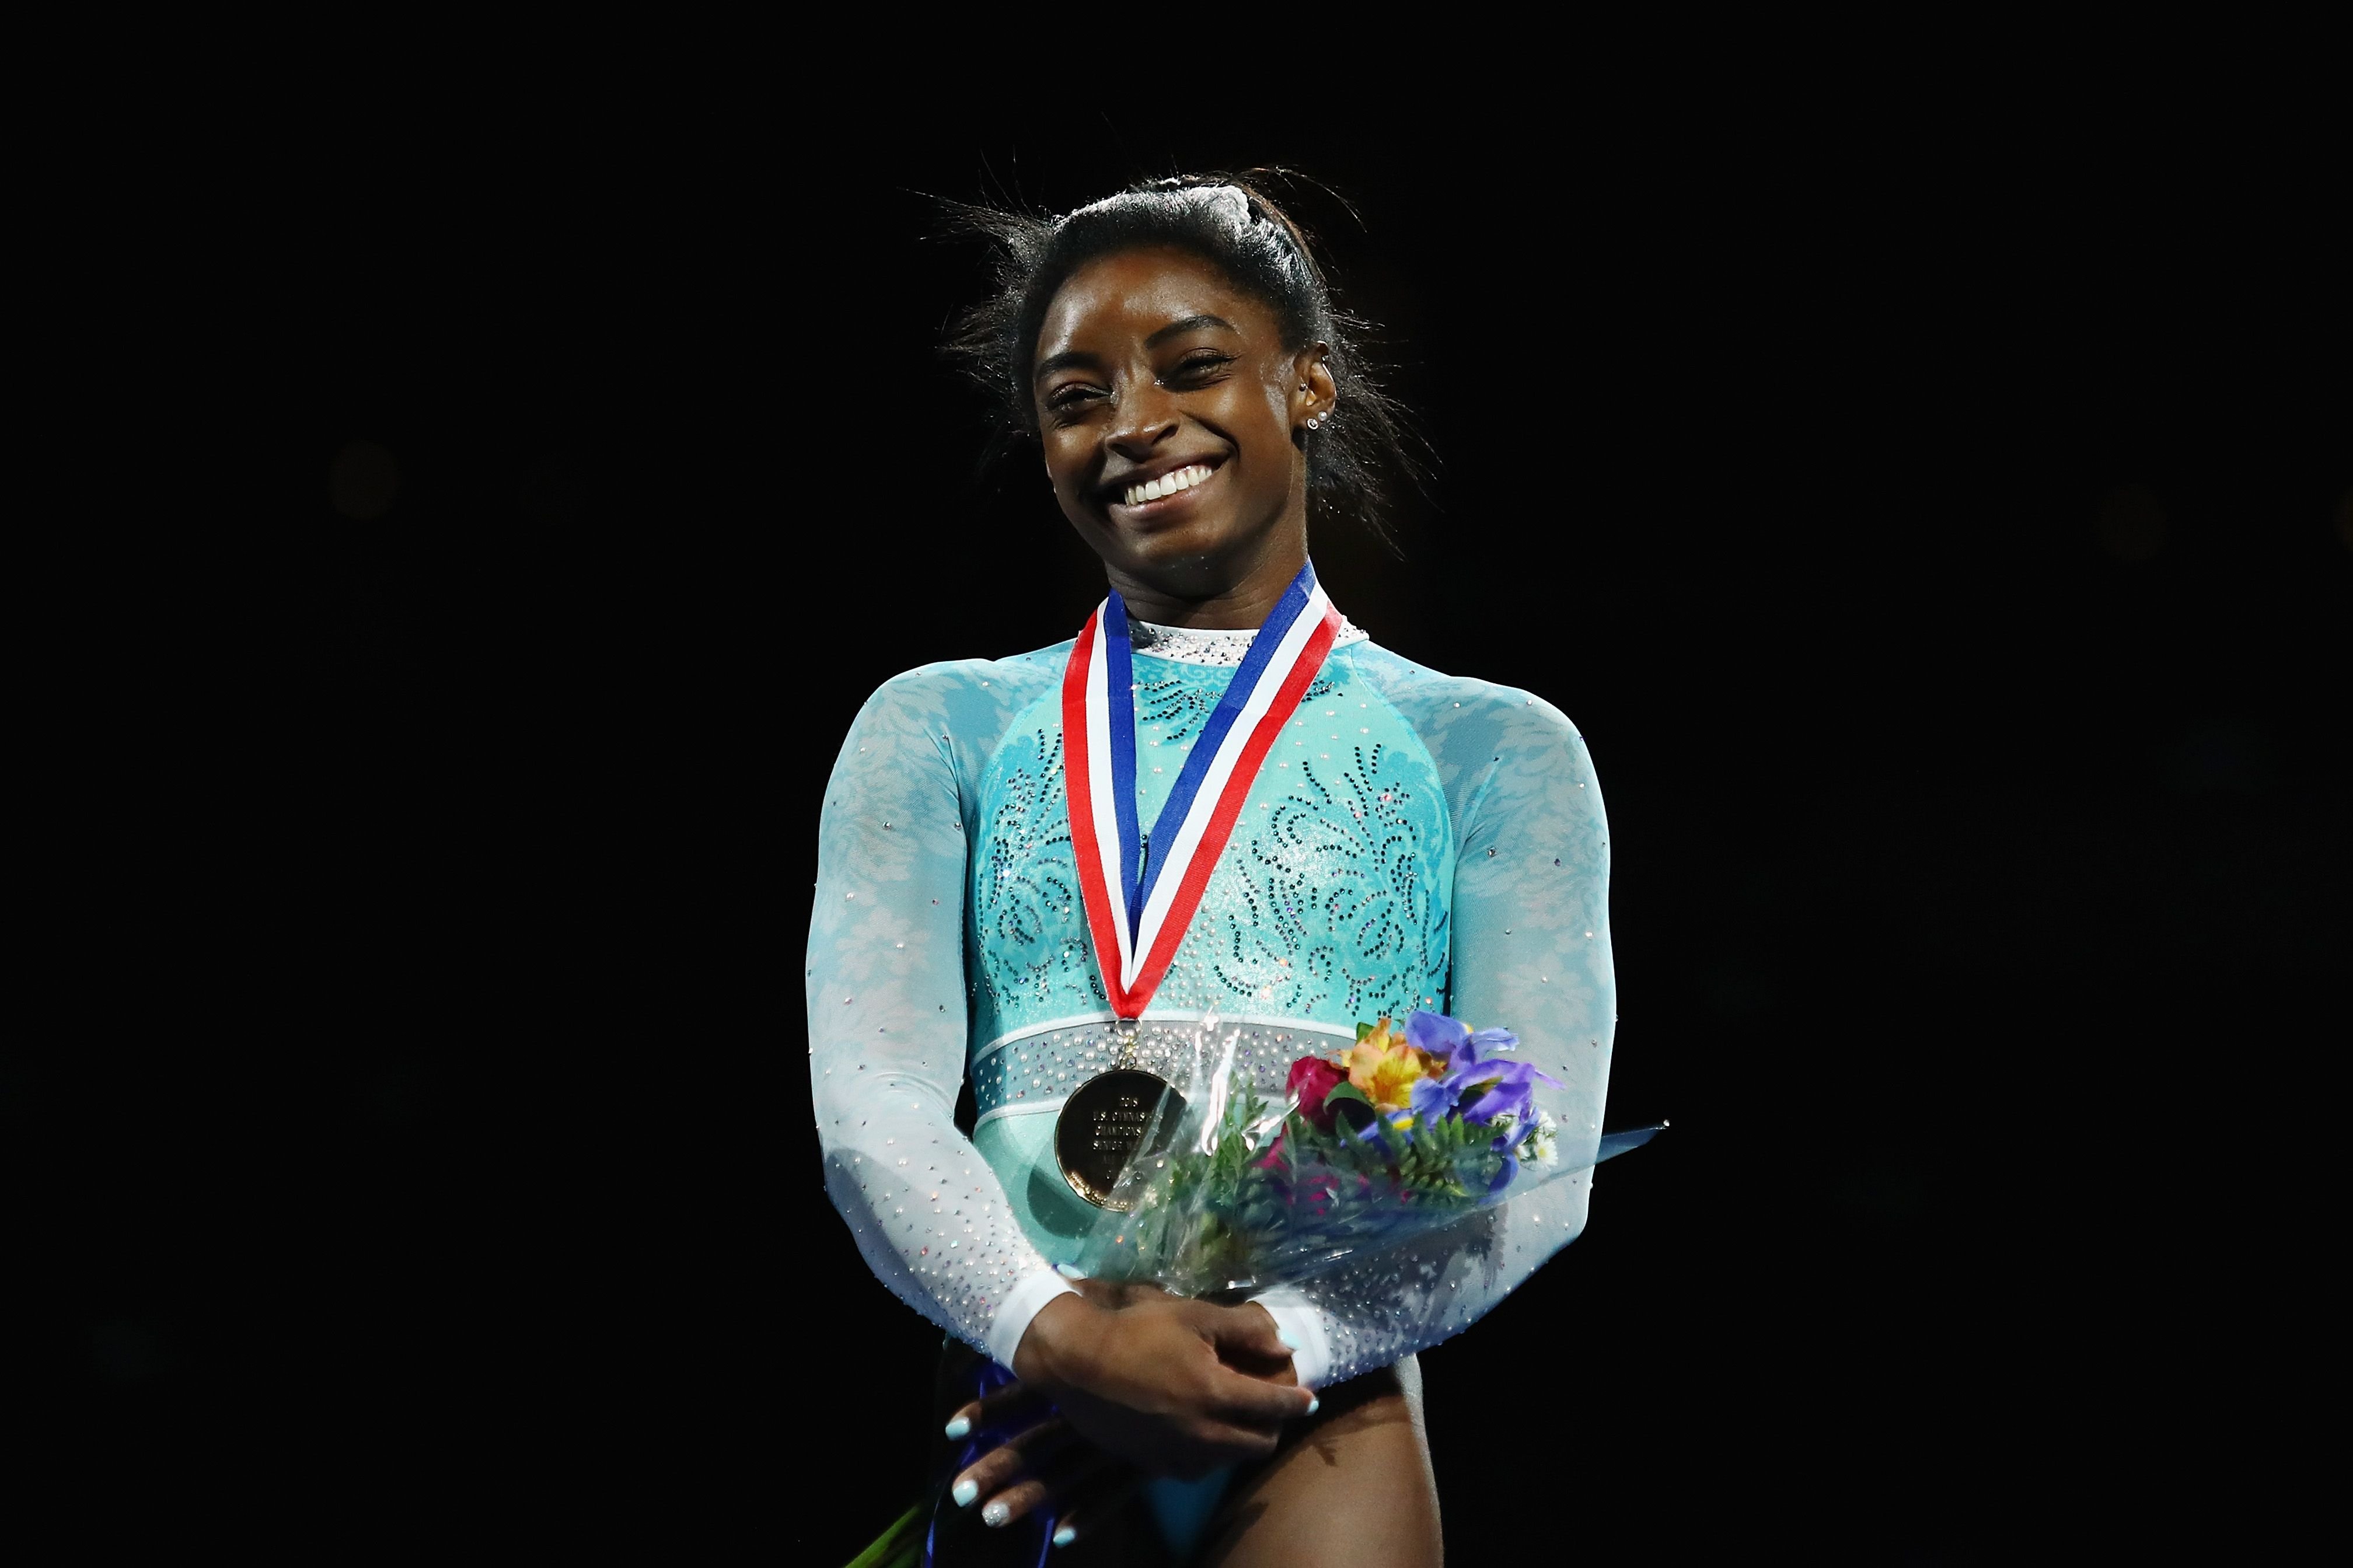 Simone Biles stands on the podium during day four of the U.S. Gymnastics Championships 2018 at TD Garden on August 19, 2018 in Boston, Massachusetts. | Photo: Getty Images.